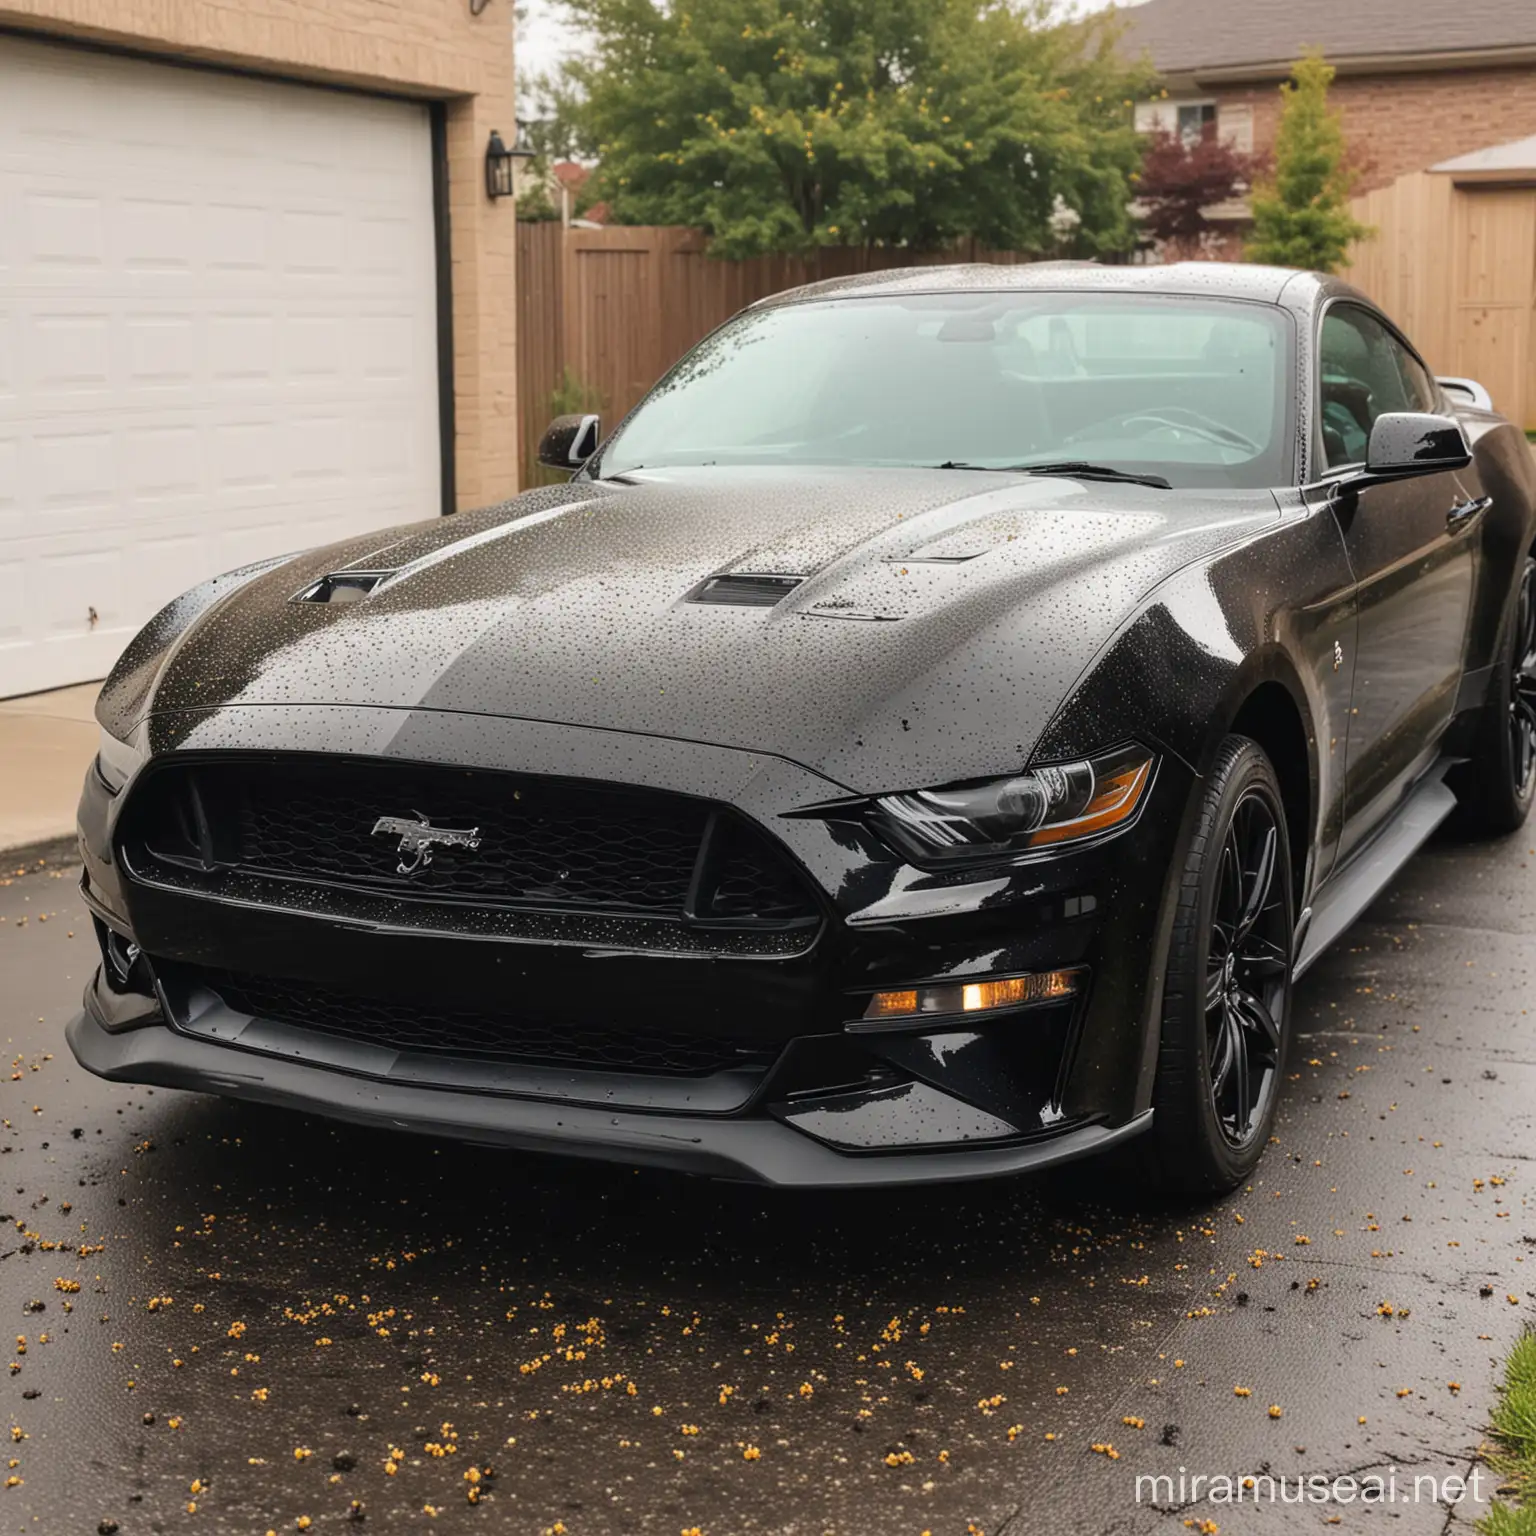 show a close up of a black ford mustang car outside with a lot of pollen on it. showing the entire car in a driveway 